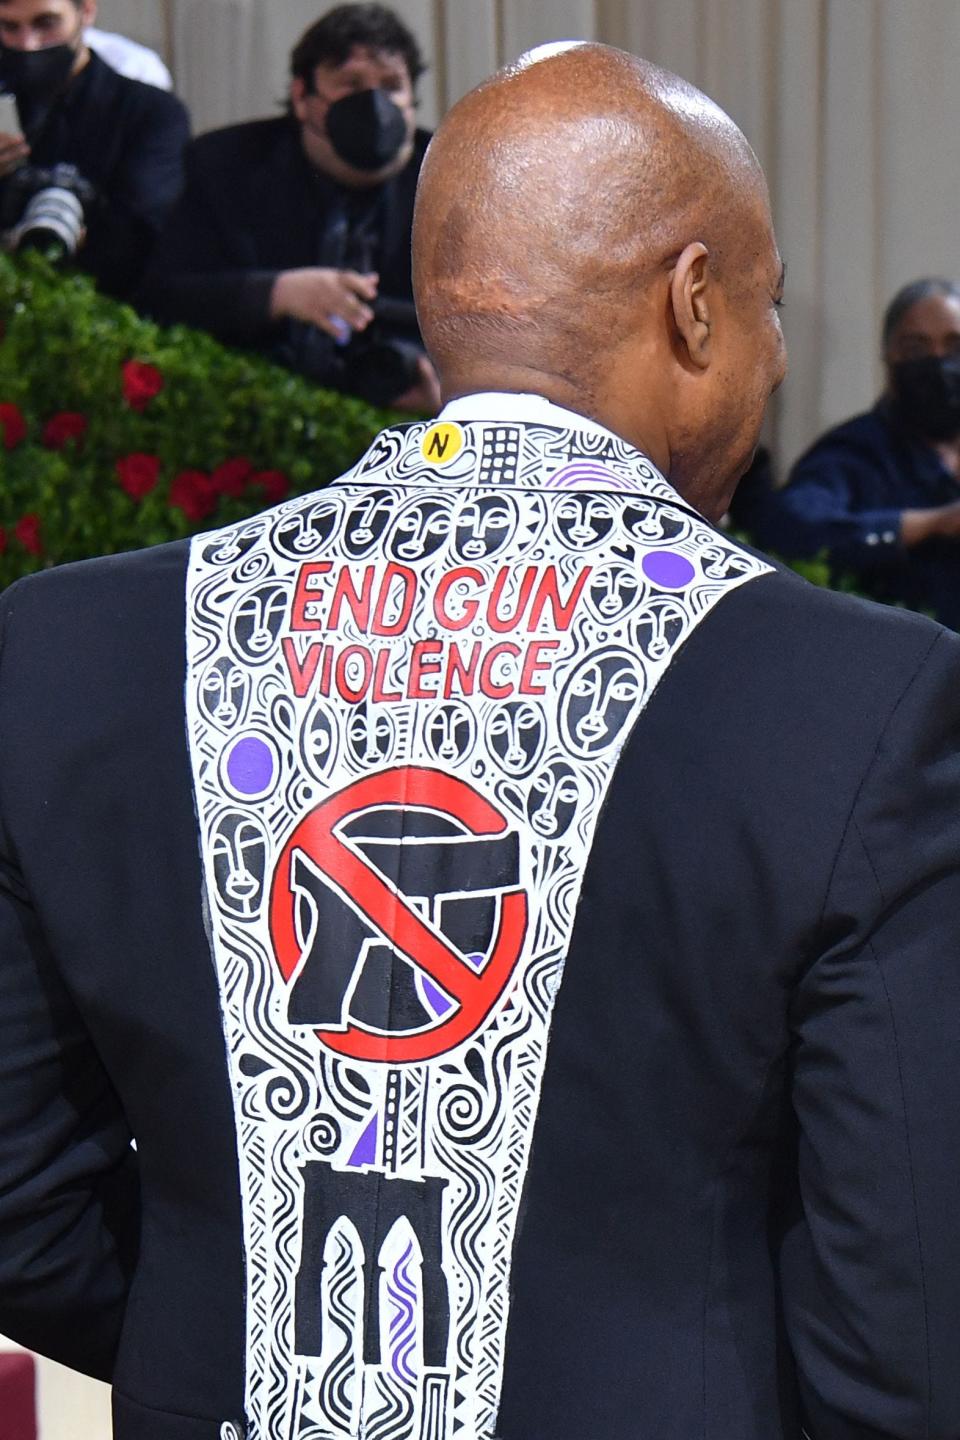 New York City Mayor Eric Adams, wearing a jacket with "End Gun Violence", arrives for the 2022 Met Gala at the Metropolitan Museum of Art.